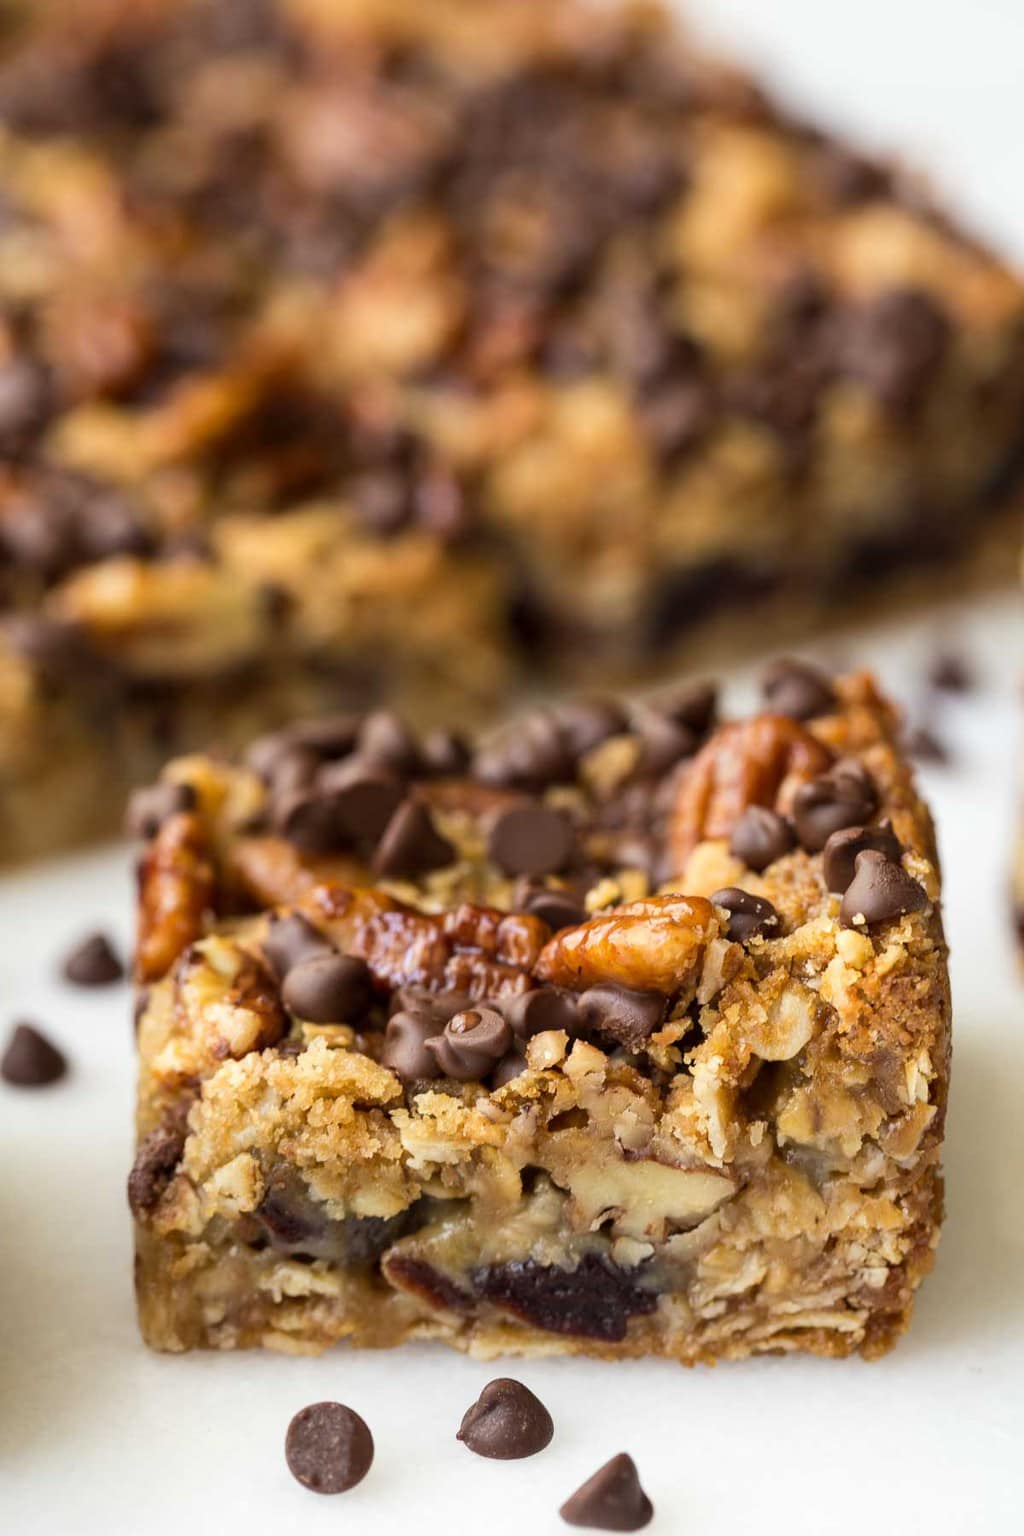 Closeup side photo of a Chocolate Chip Cherry Oatmeal Bar with a pan of the bars in the background.